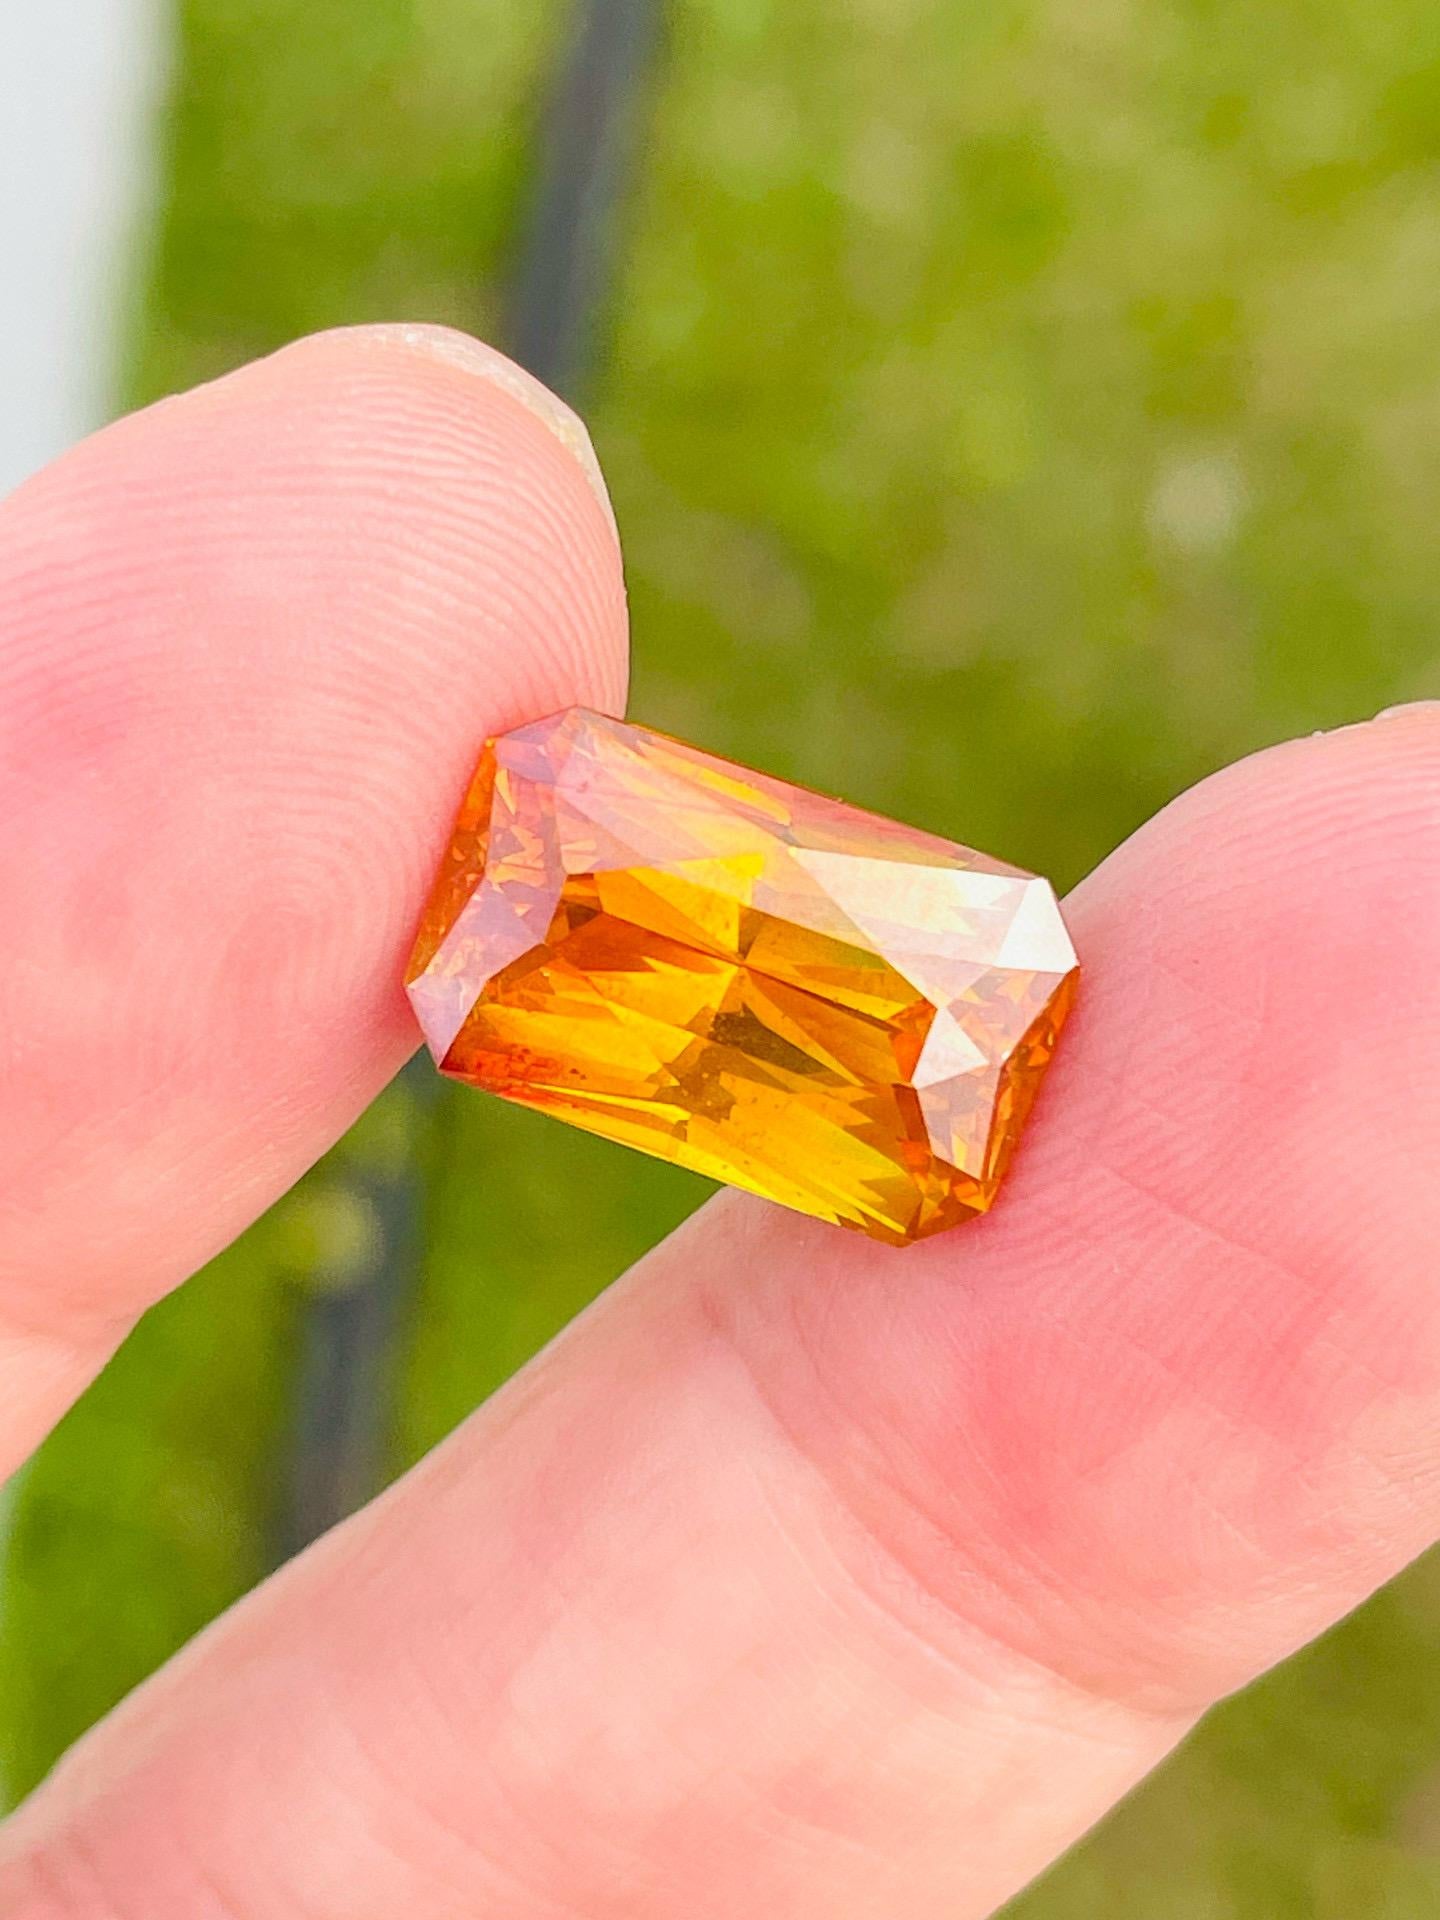 Octagon Cut 10.79ct Sphalerite gemstone sparking laster play color orange yellow from Spain  For Sale